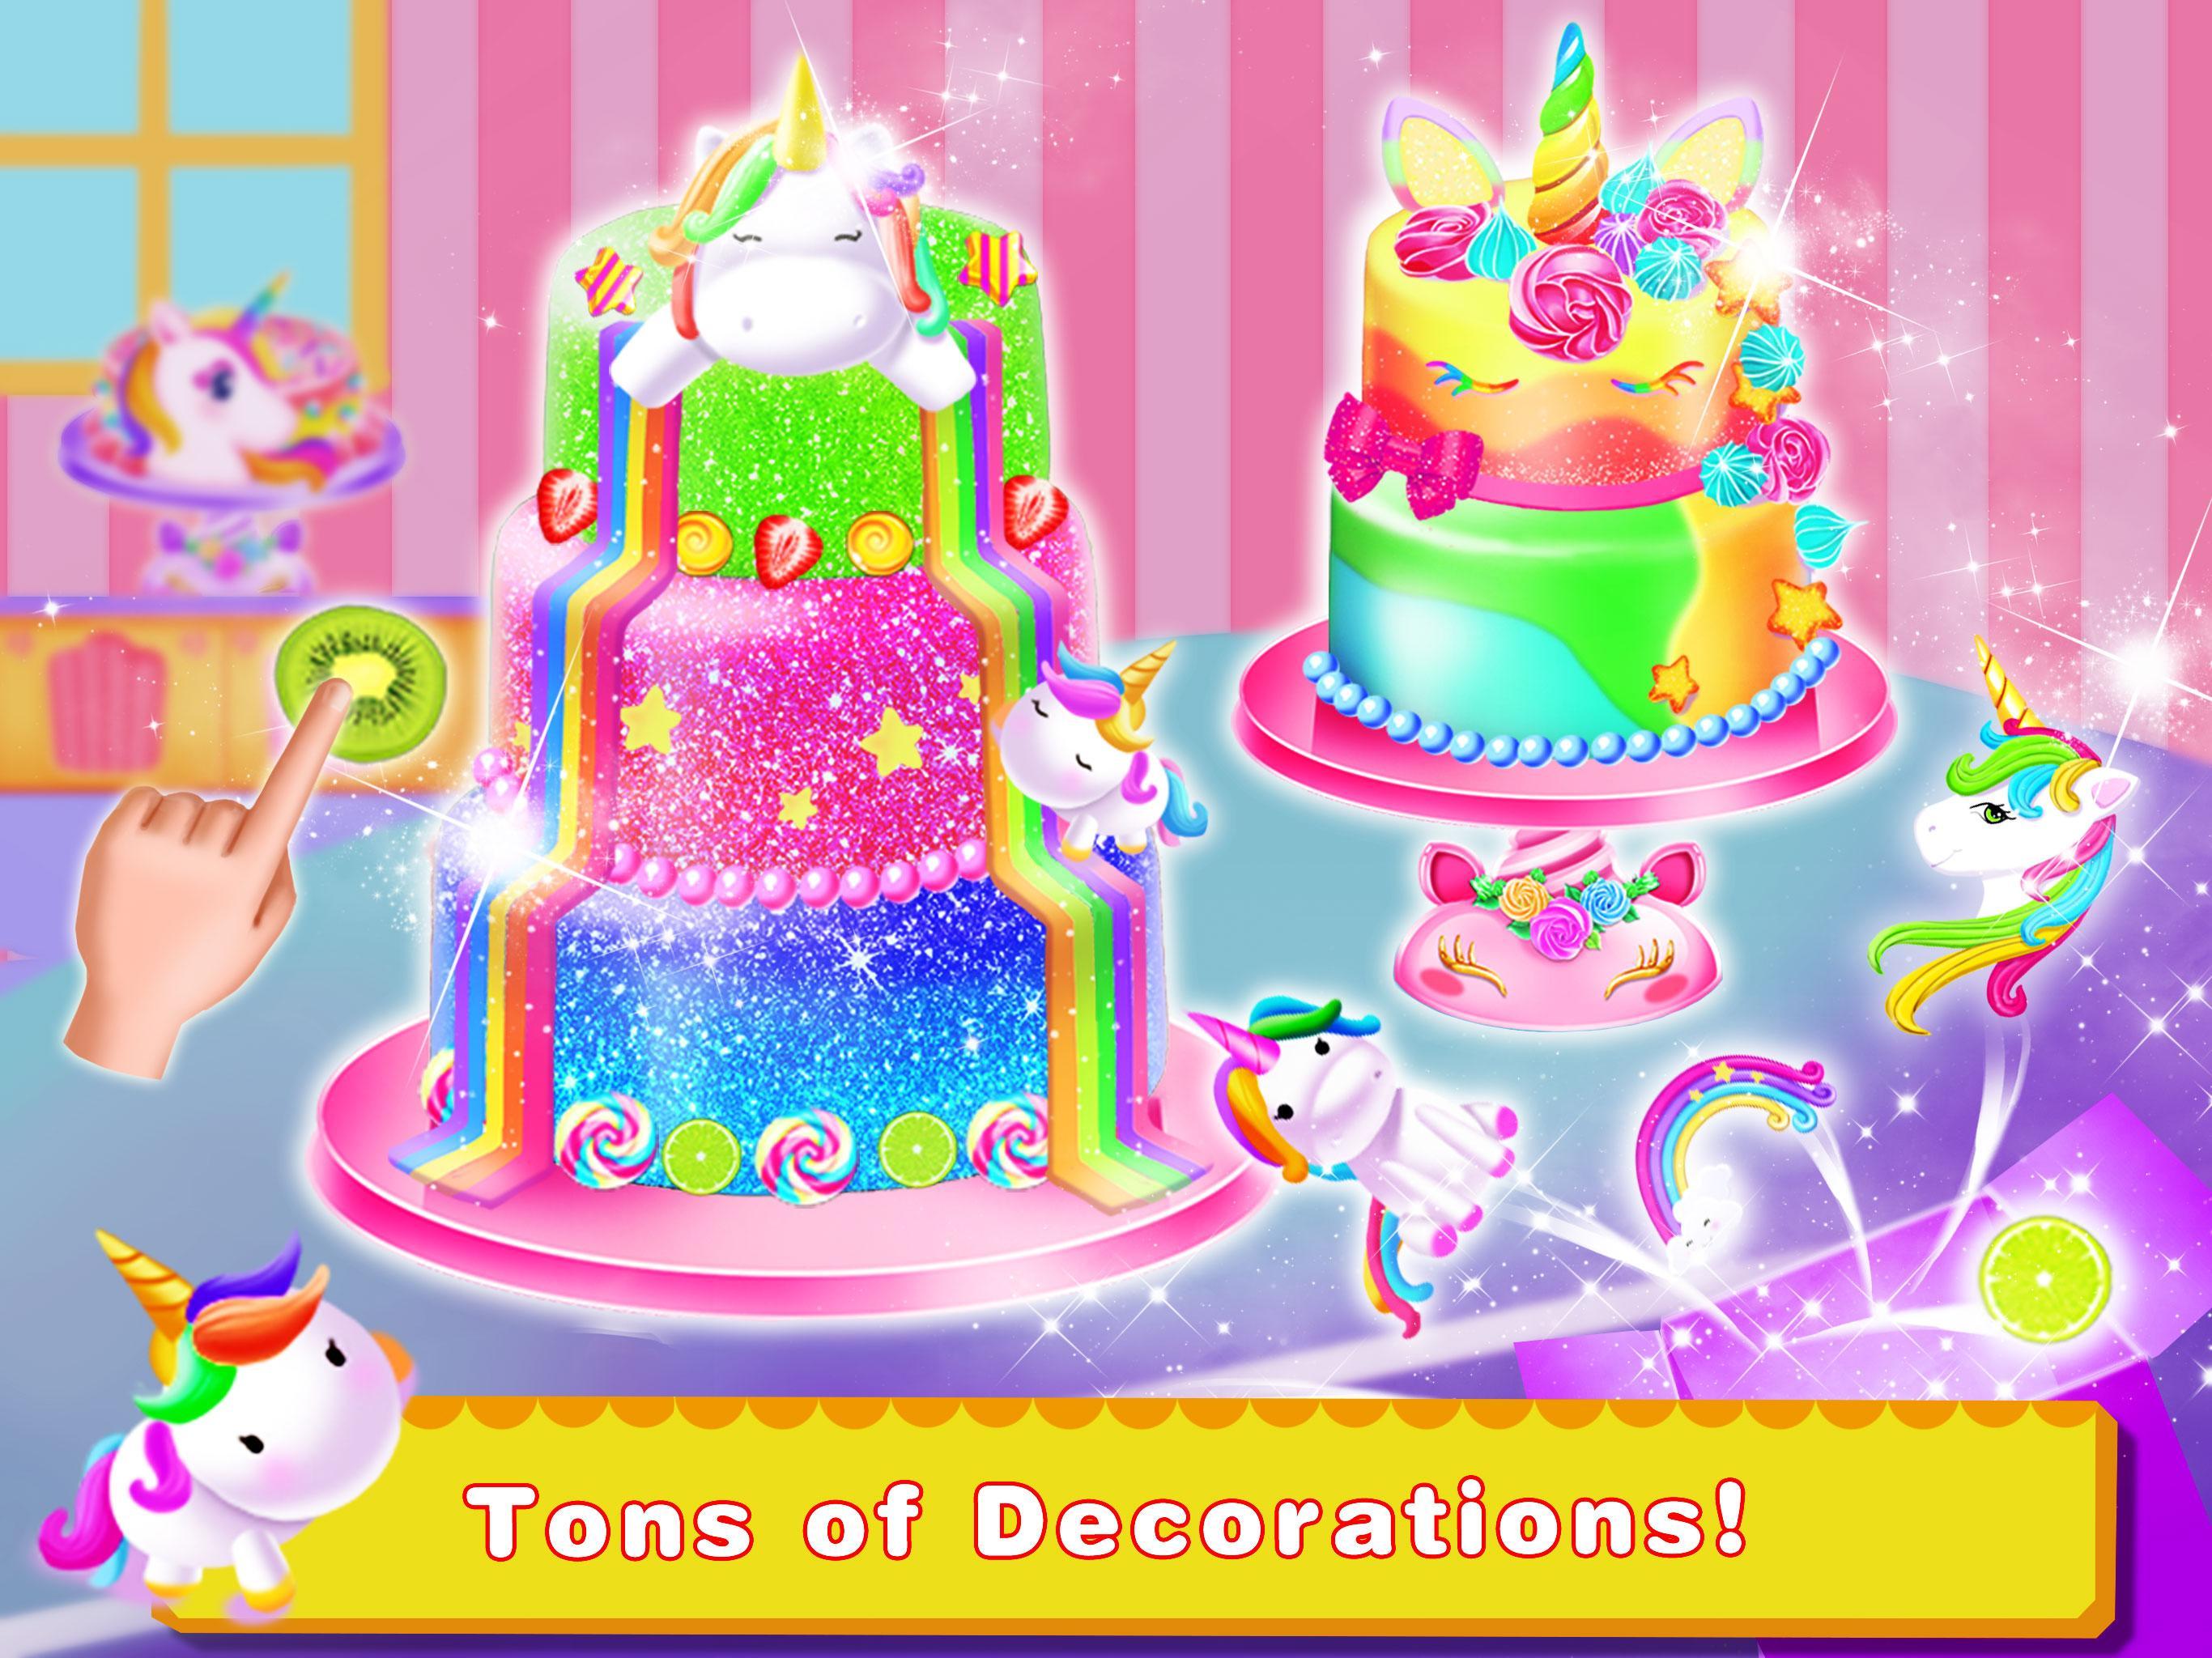 Cooking Unicorn Rainbow Cake- Food Game for girl for Android - APK Download